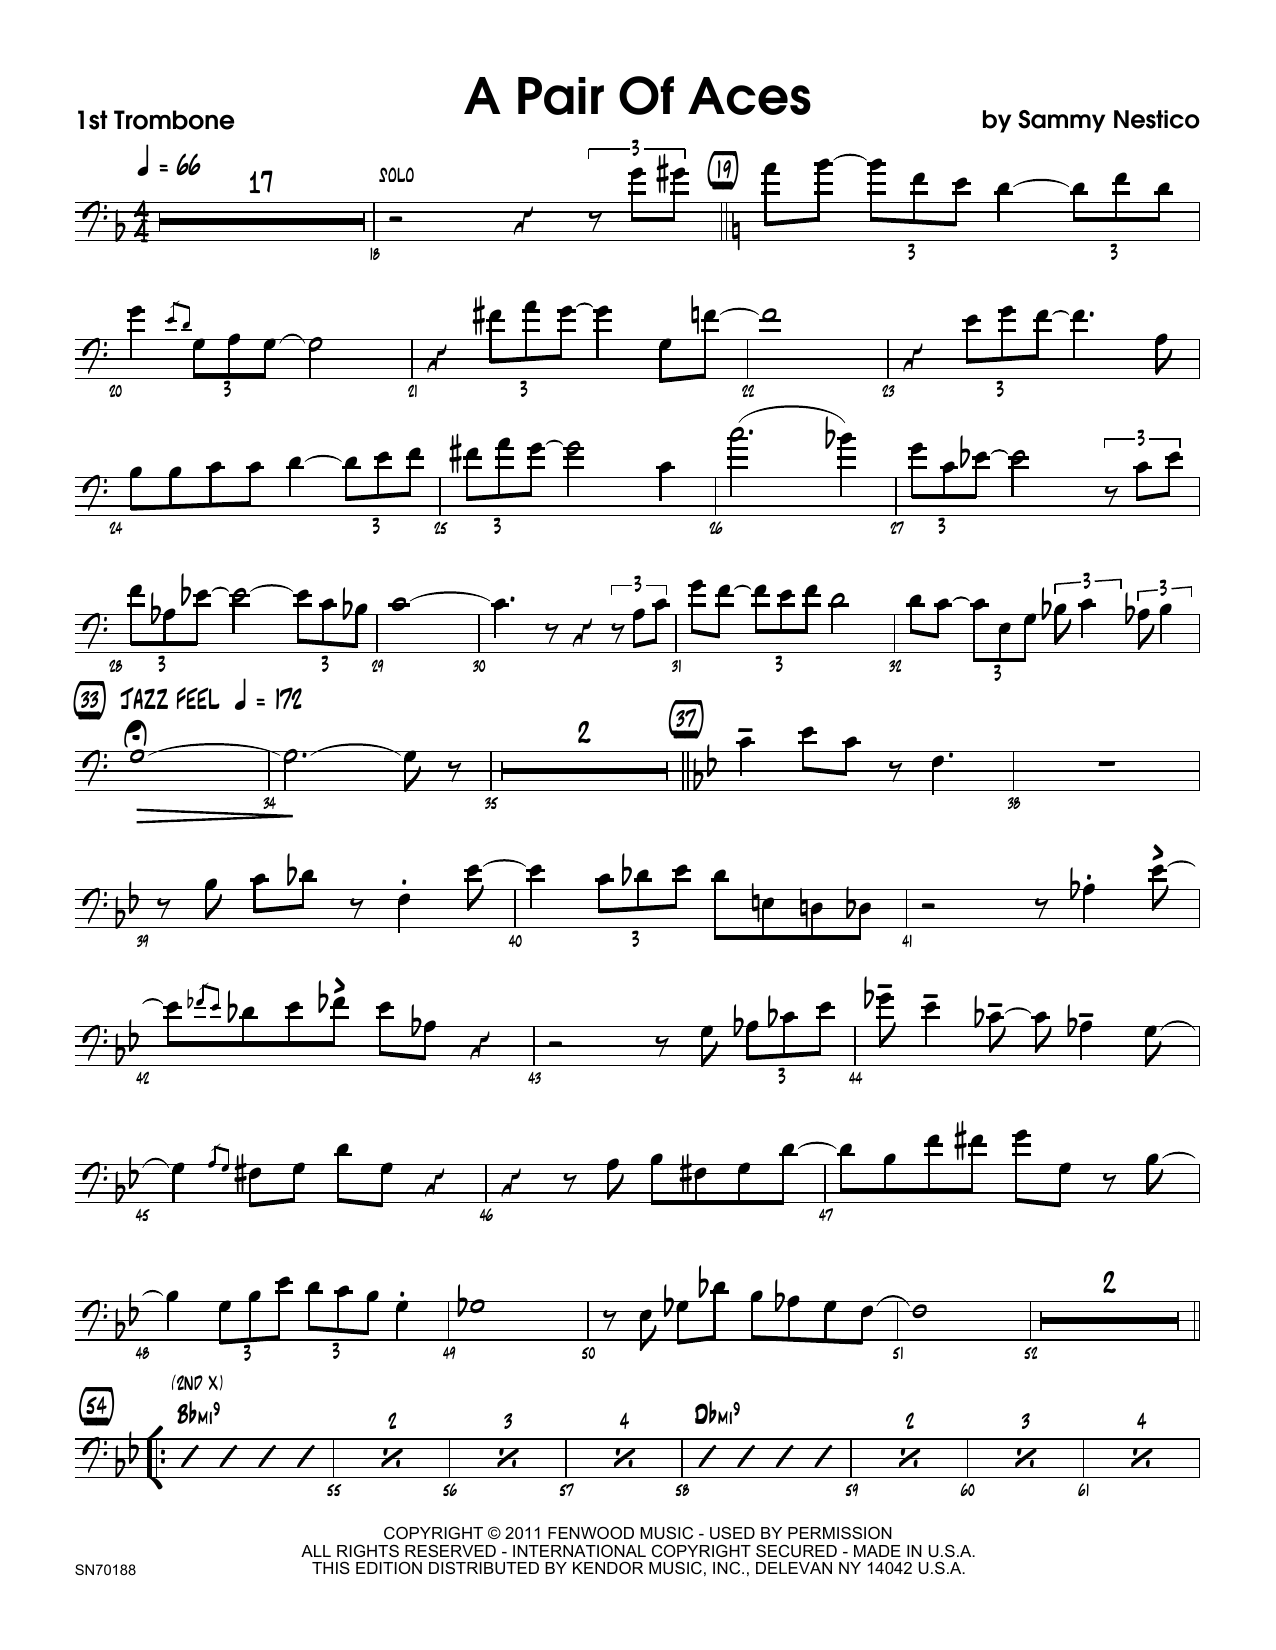 Download Sammy Nestico A Pair Of Aces - 1st Trombone Sheet Music